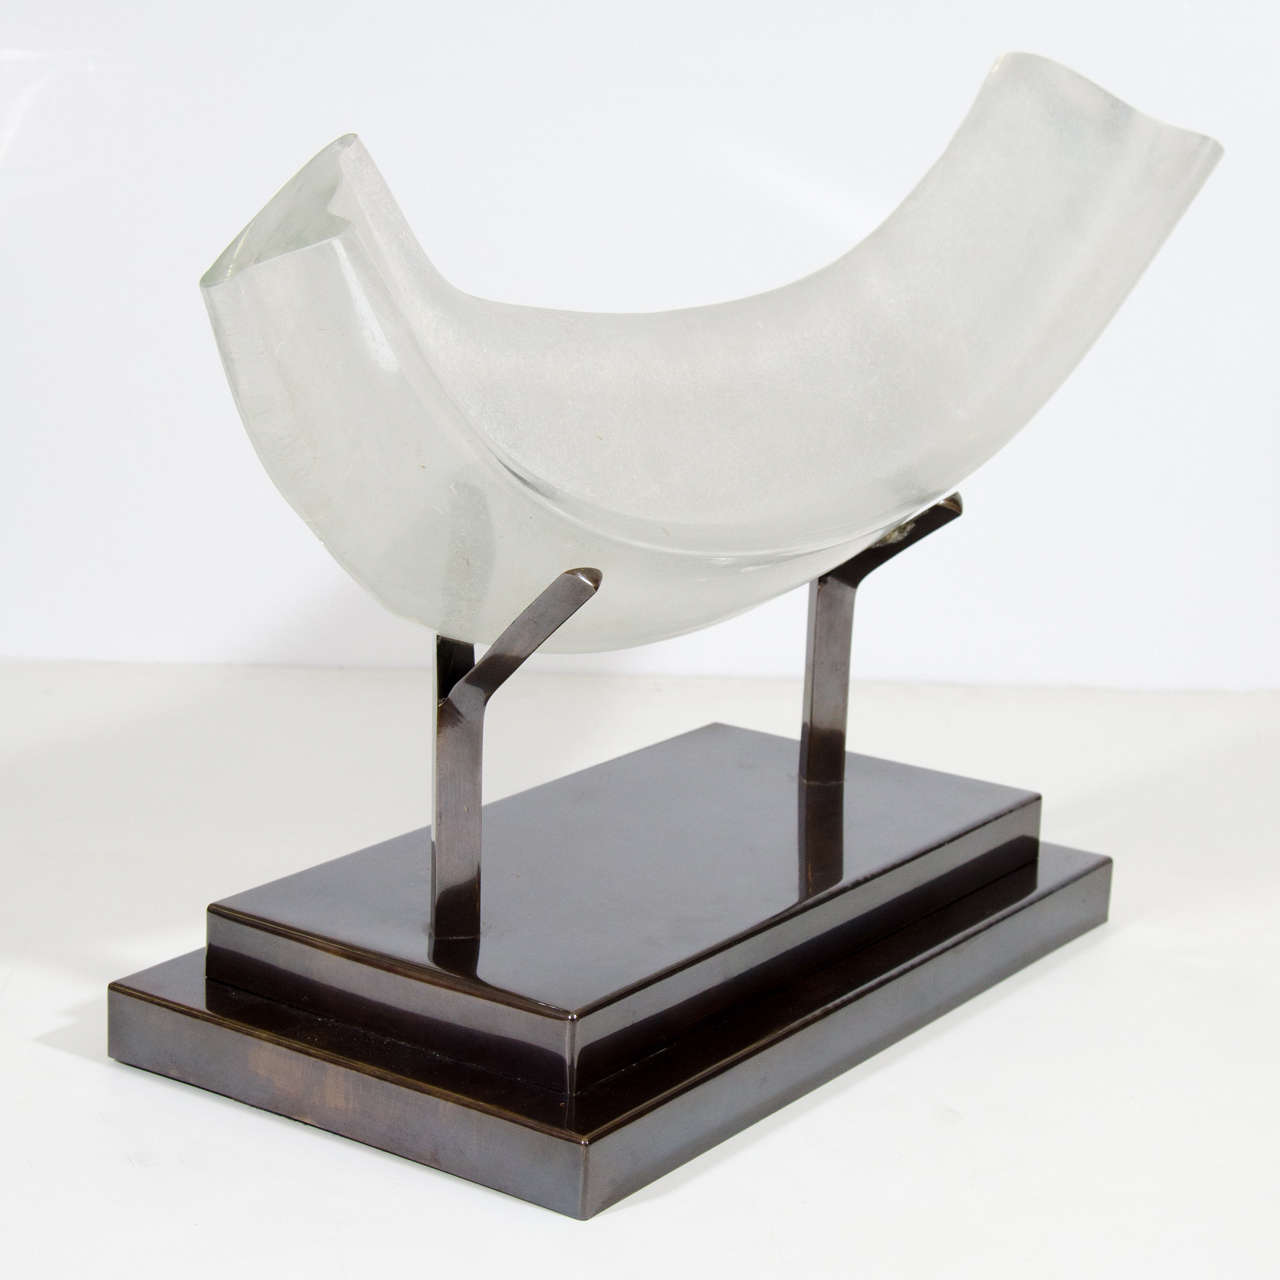 A modern multilayered thick glass organic or fossil like sculpture on a bronzed metal base attributed to Dorothe van Driel.